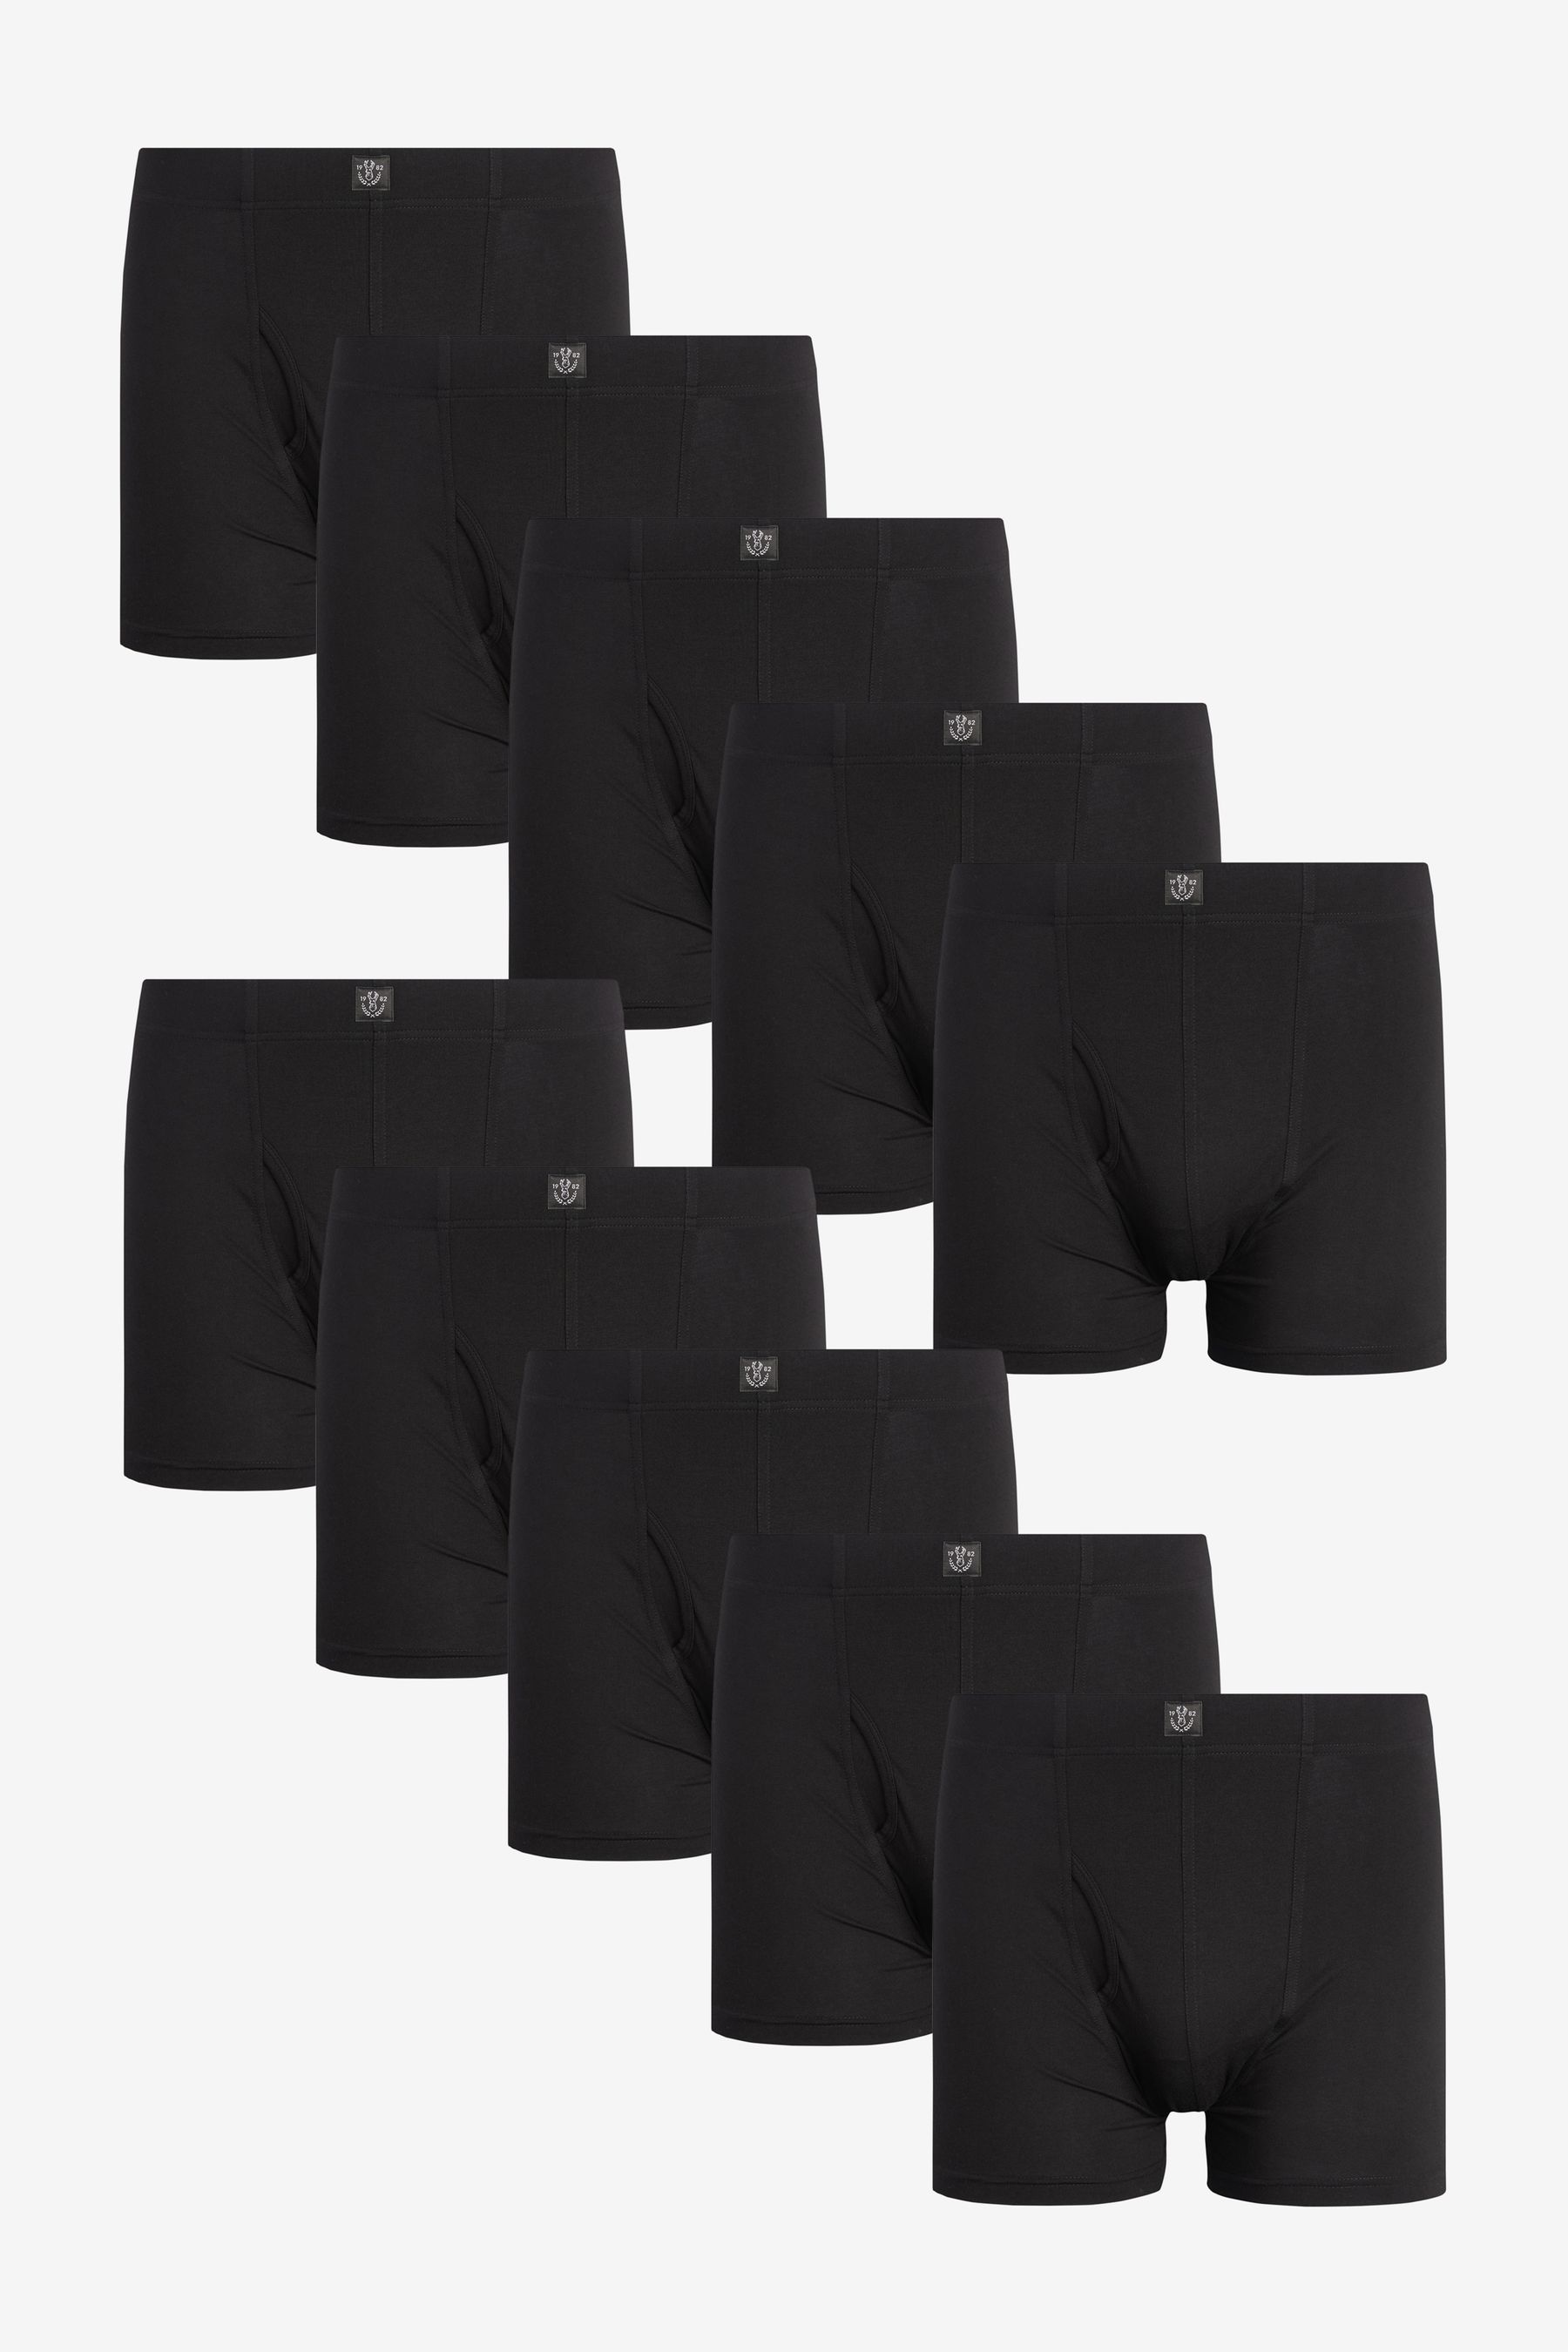 Buy Essential Black 10 pack A-Front Boxers from the Next UK online shop